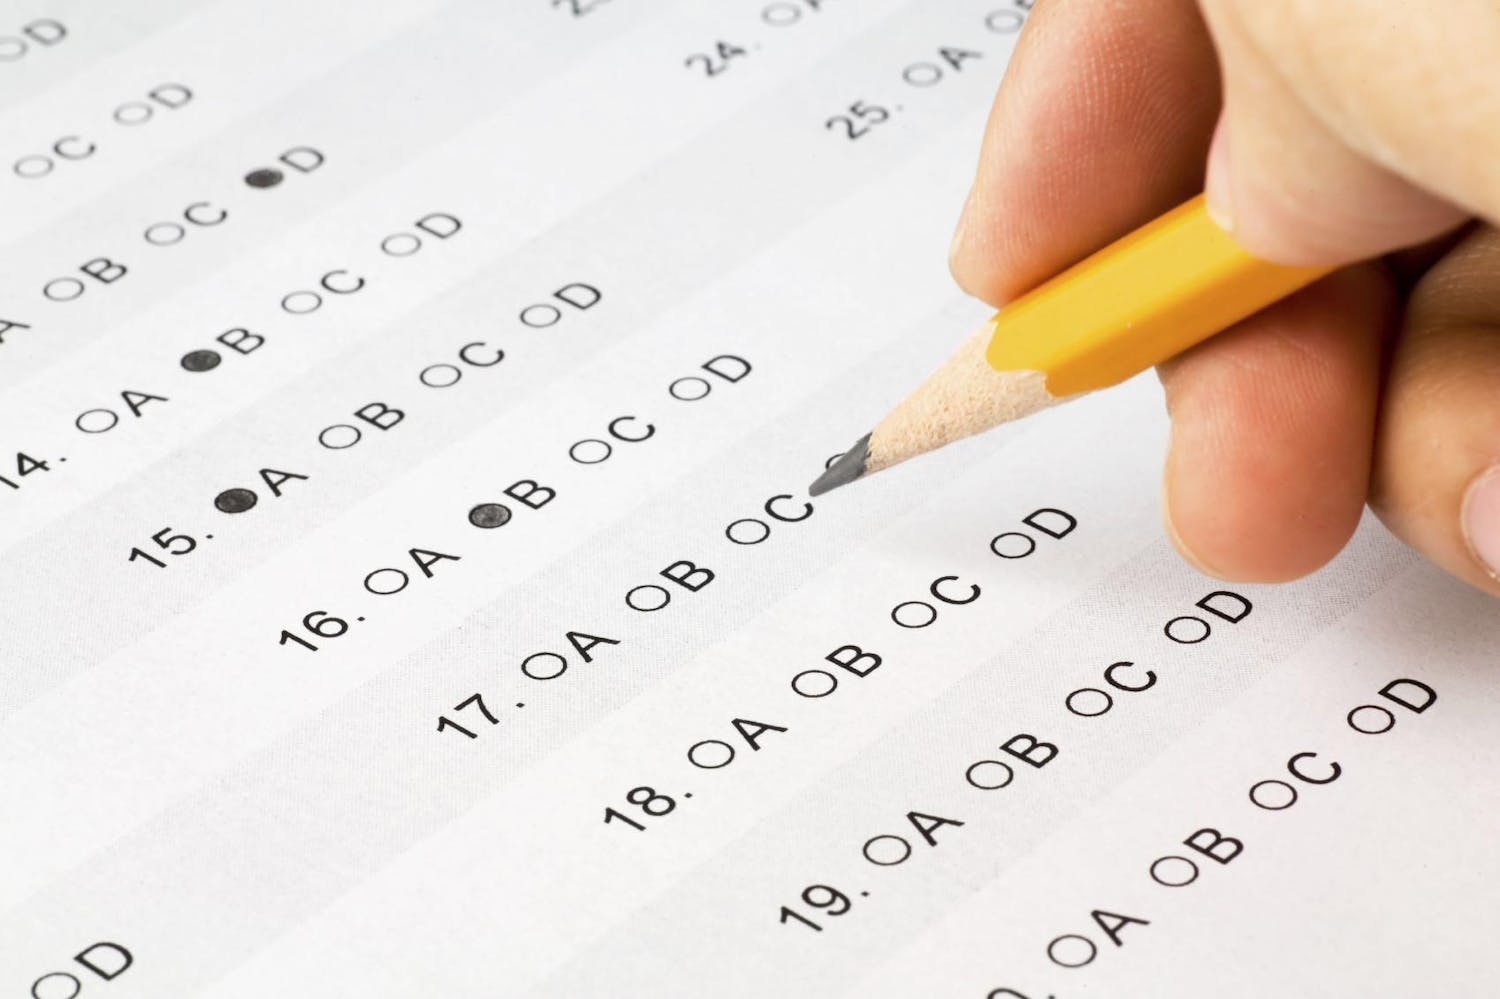 Close up image of a multiple choice test